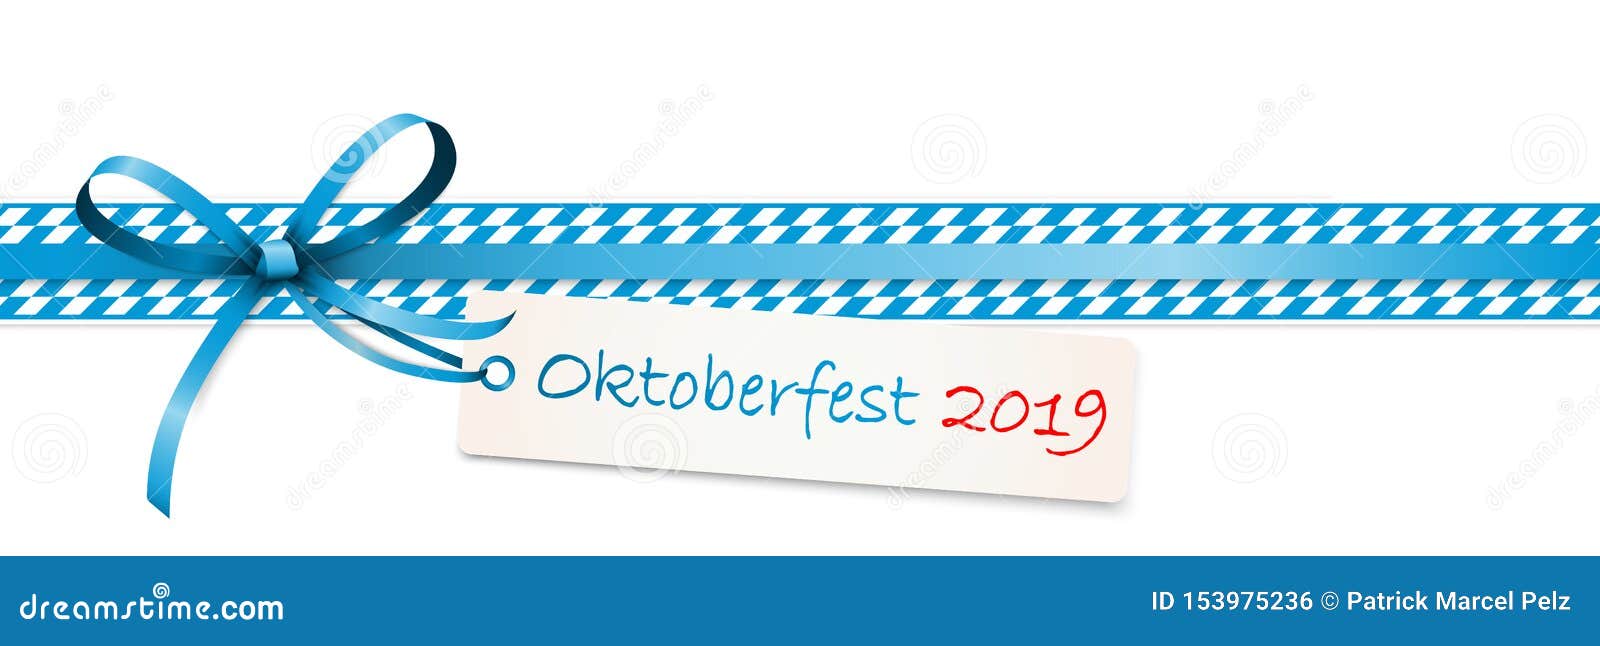 Oktoberfest Blue Ribbon Bow With Hang Tag 2019 Stock Vector